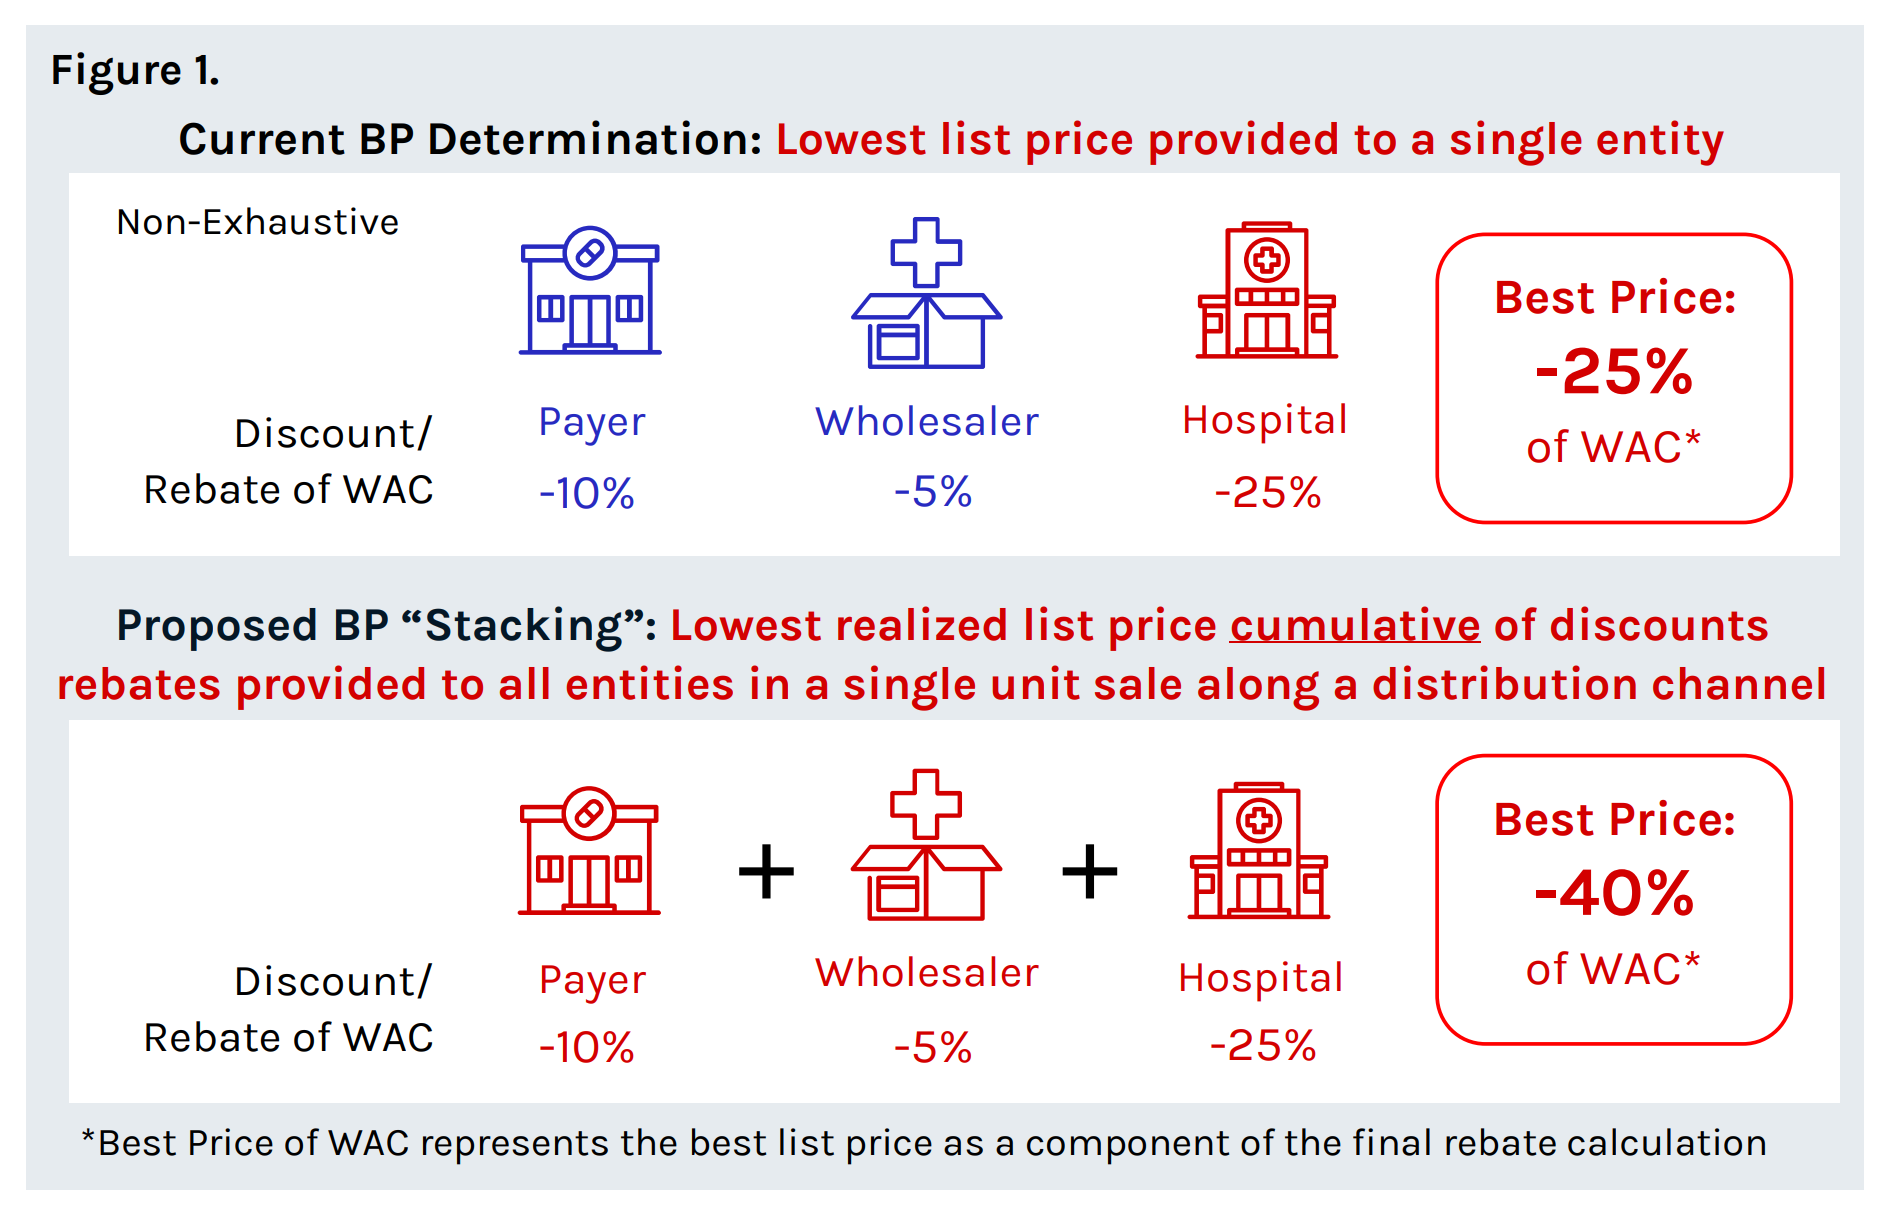 Current BP Determination: Lowest list price provided to a single entity and Proposed BP “Stacking”: Lowest realized list price cumulative of discounts  rebates provided to all entities in a single unit sale along a distribution channel with graphical icons of house, box, and hospital buildings